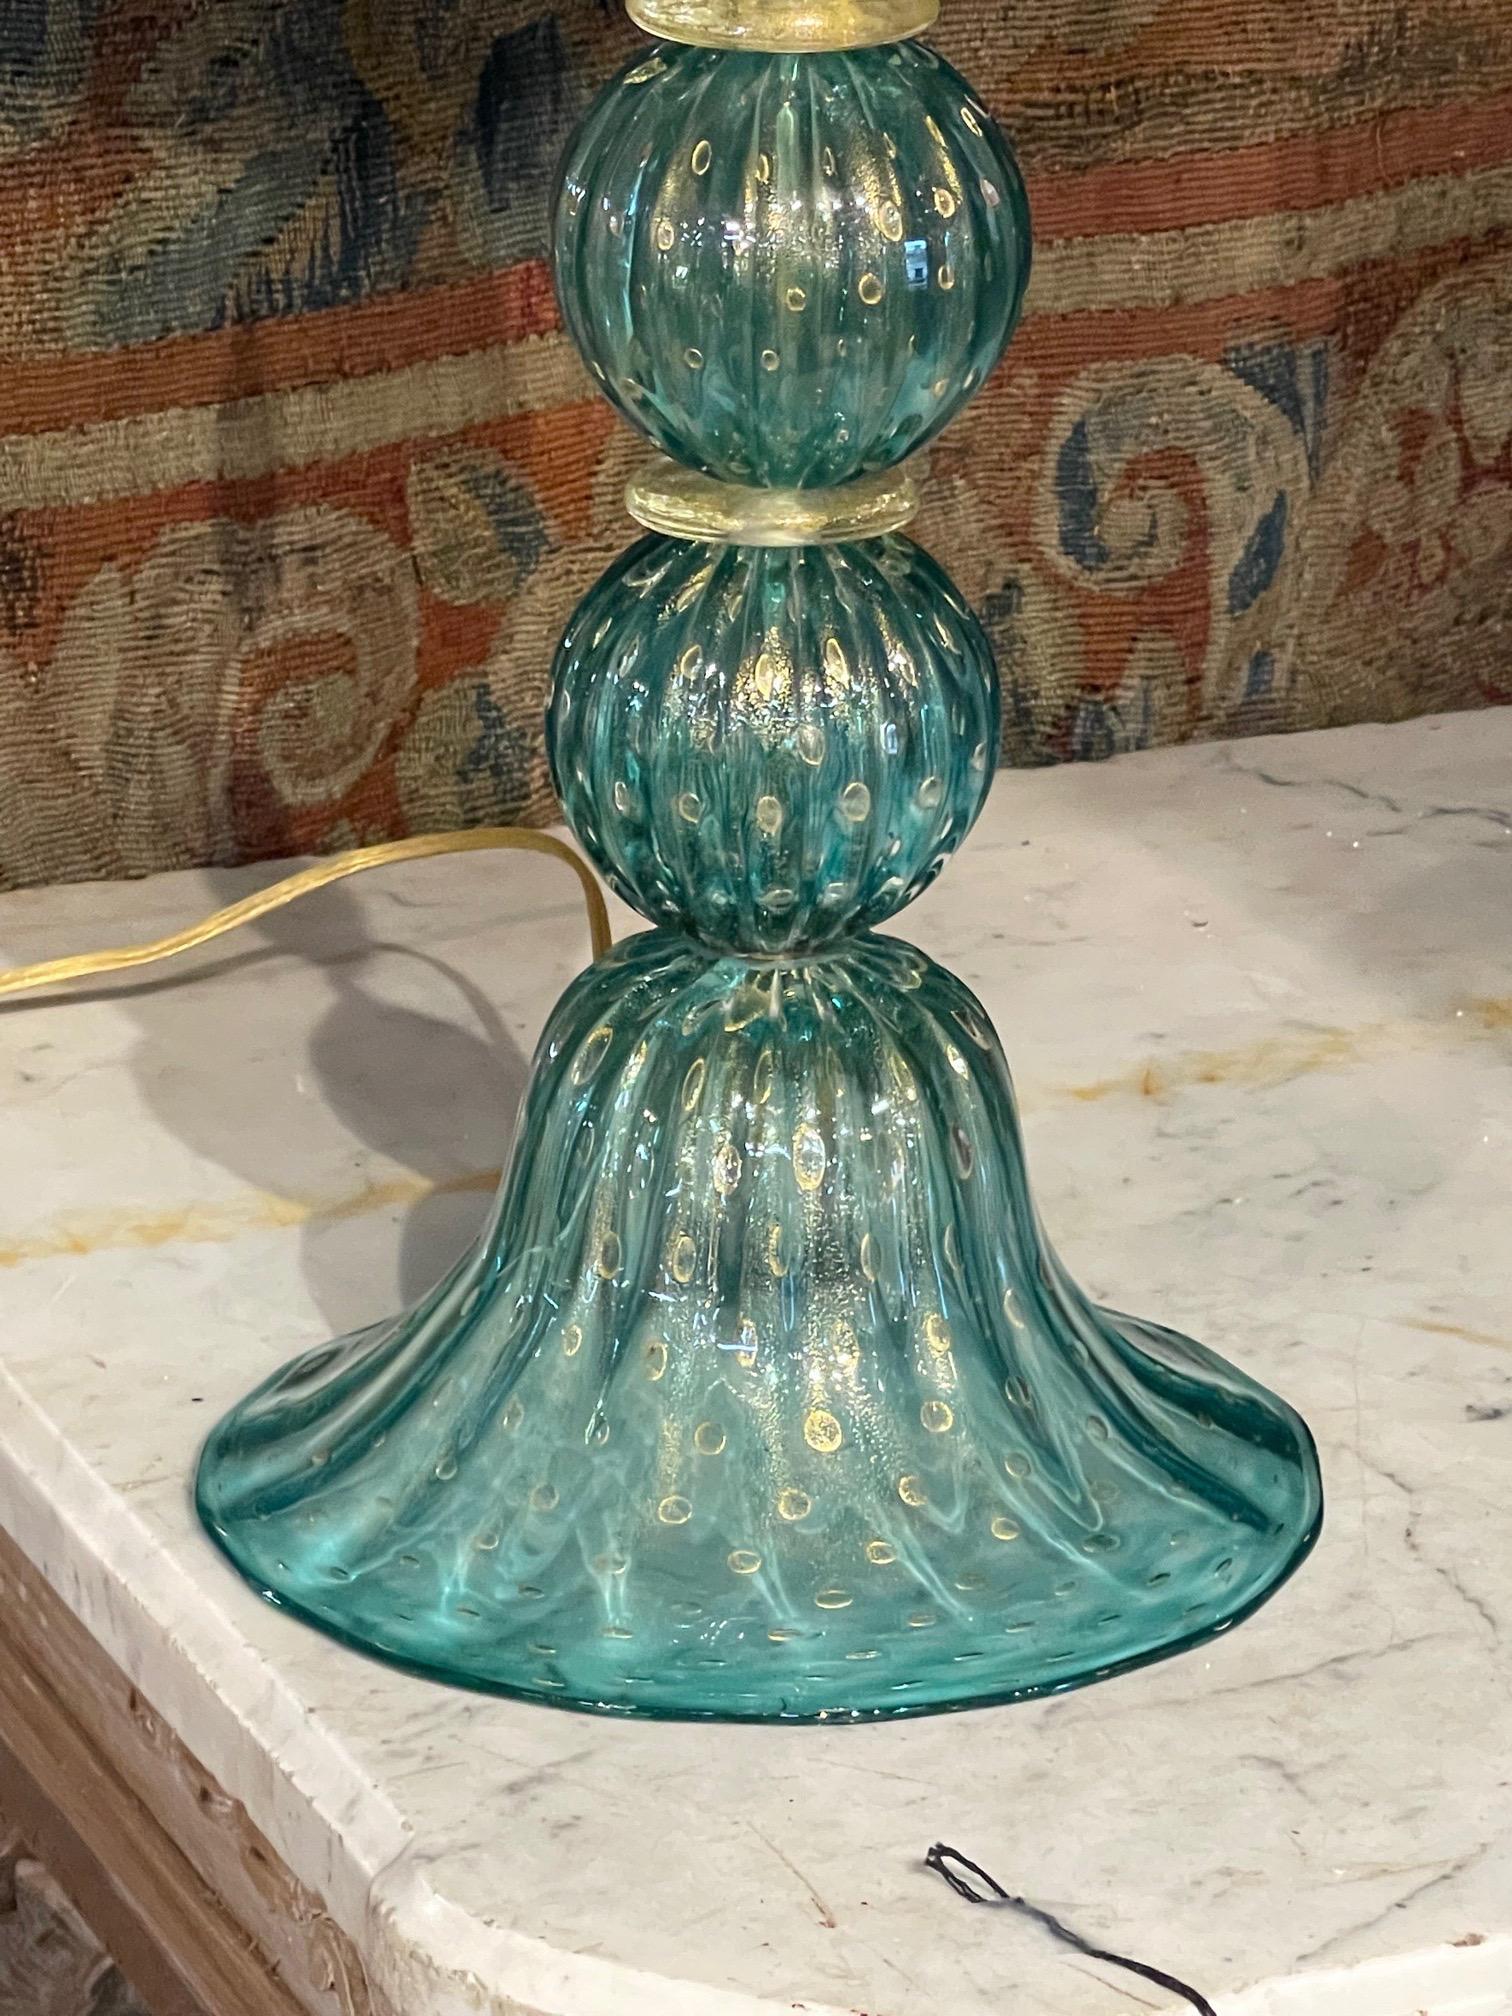 Lovely vintage green and gold Murano glass lamp. Beautiful glistening glass and pretty lamp shade as well. 
Nice!.